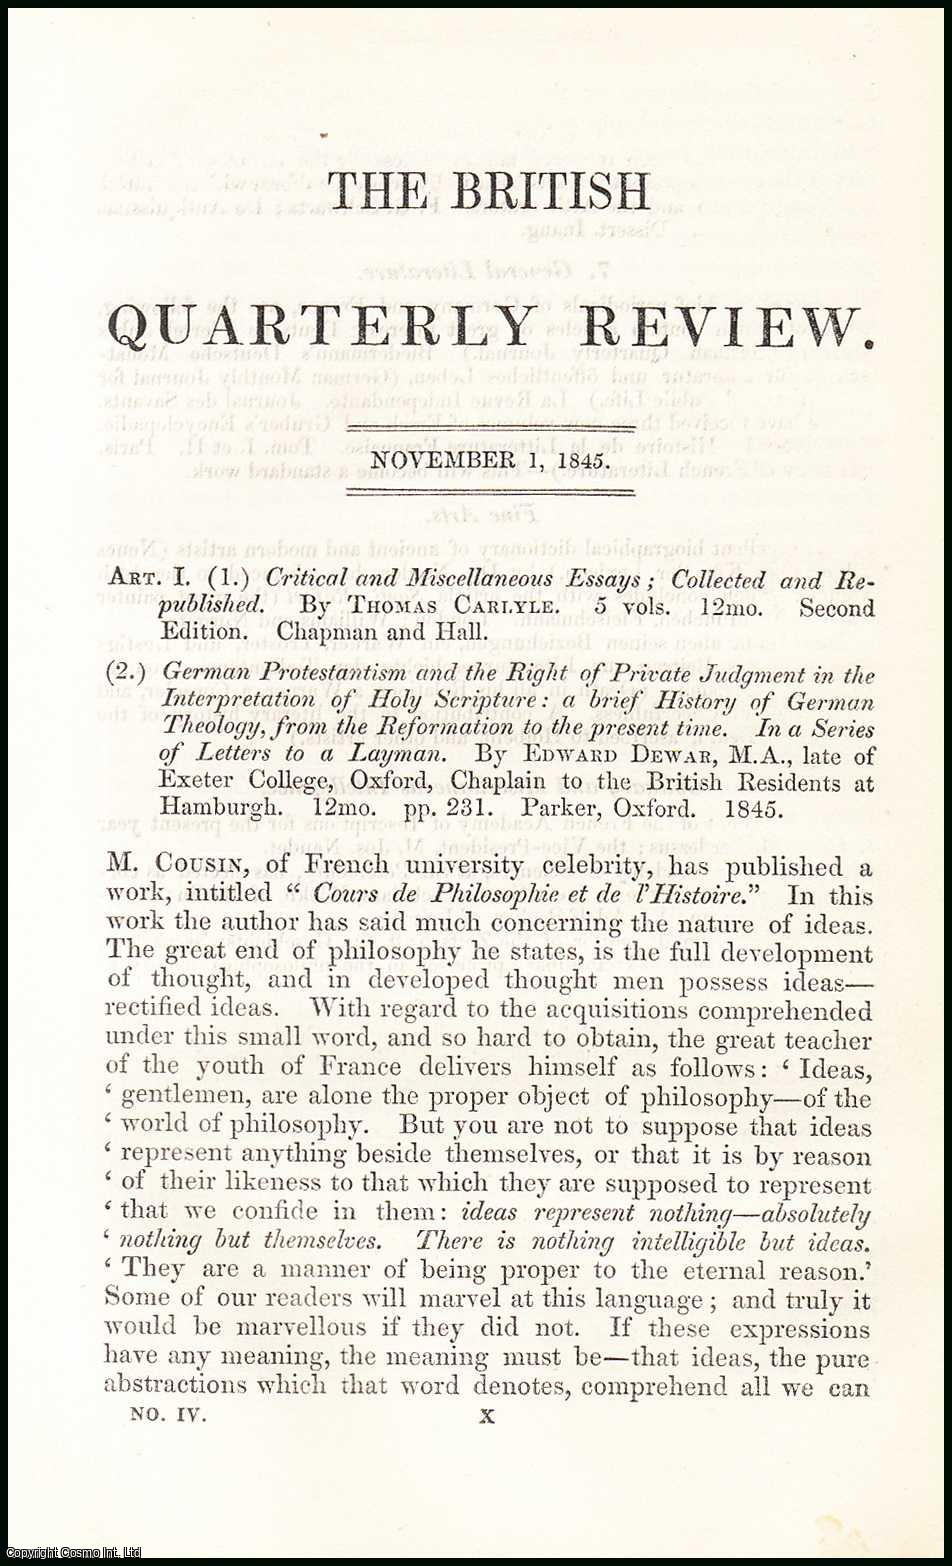 Robert Vaughan - German Philosophy and Christian Theology. A rare original article from the British Quarterly Review, 1845.